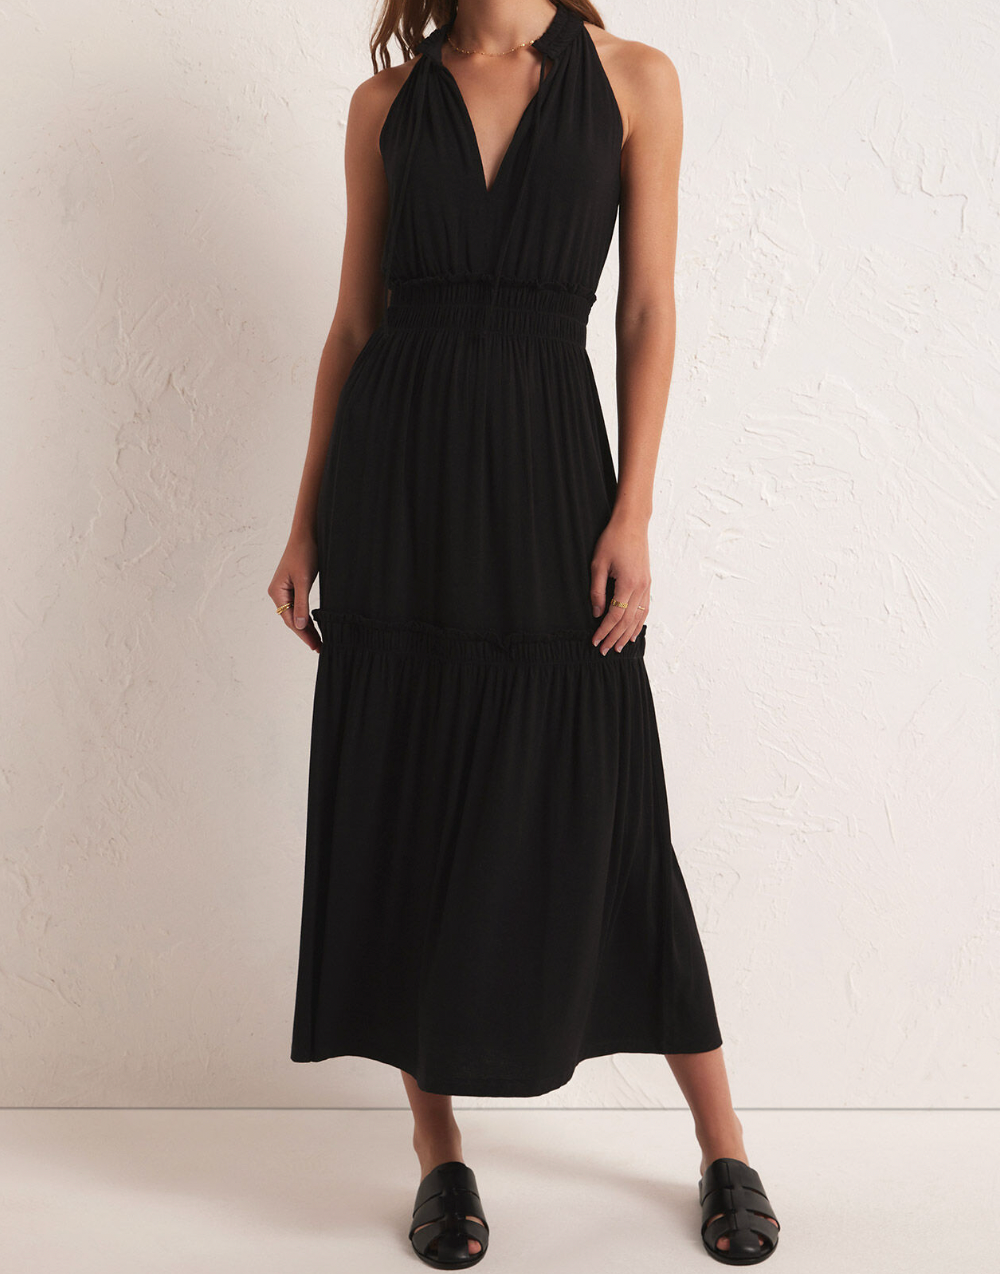 Black Collared Neck Dress Apex Ethical Boutique